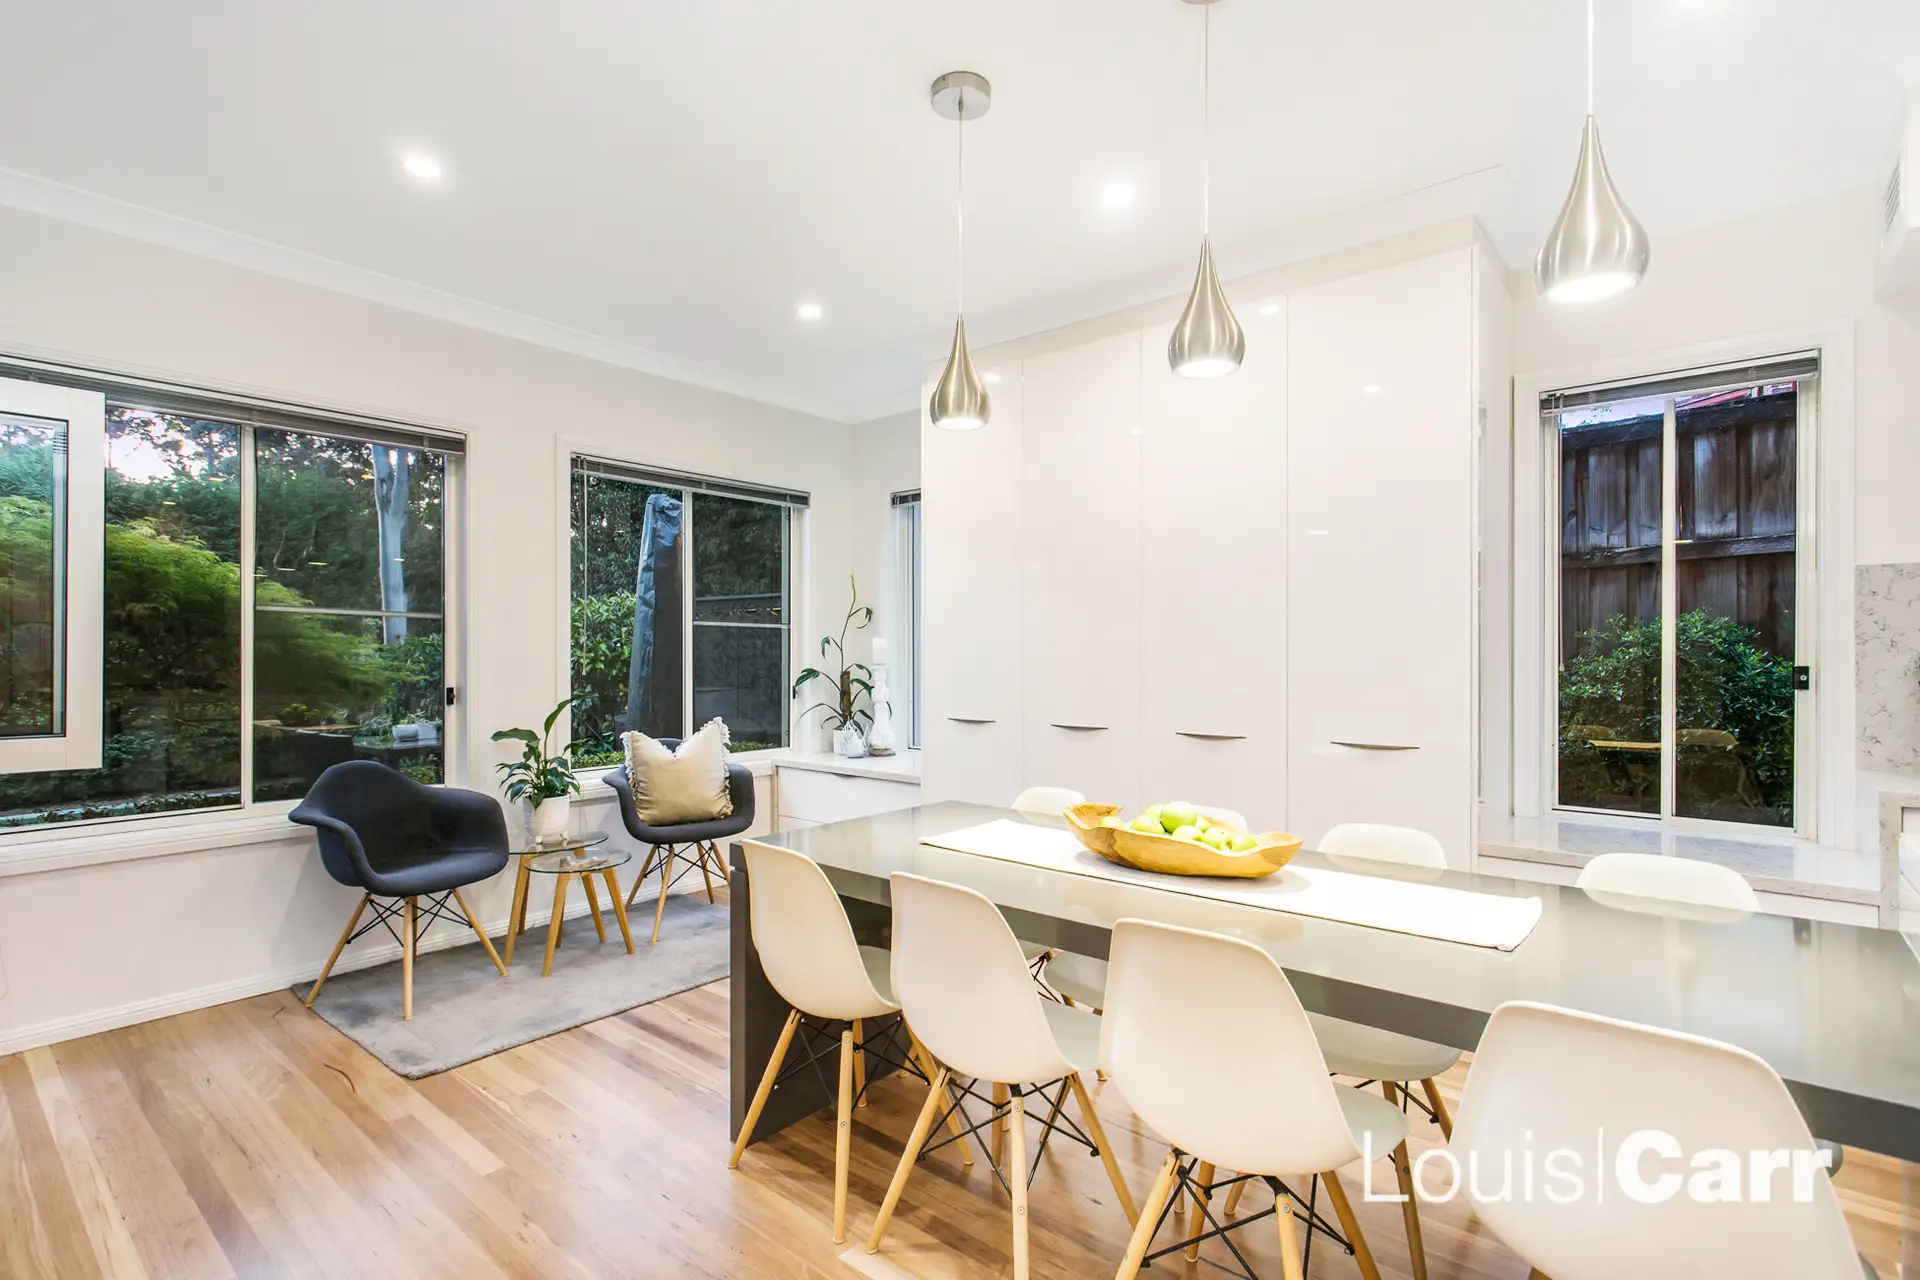 12 Forestwood Crescent, West Pennant Hills Sold by Louis Carr Real Estate - image 1